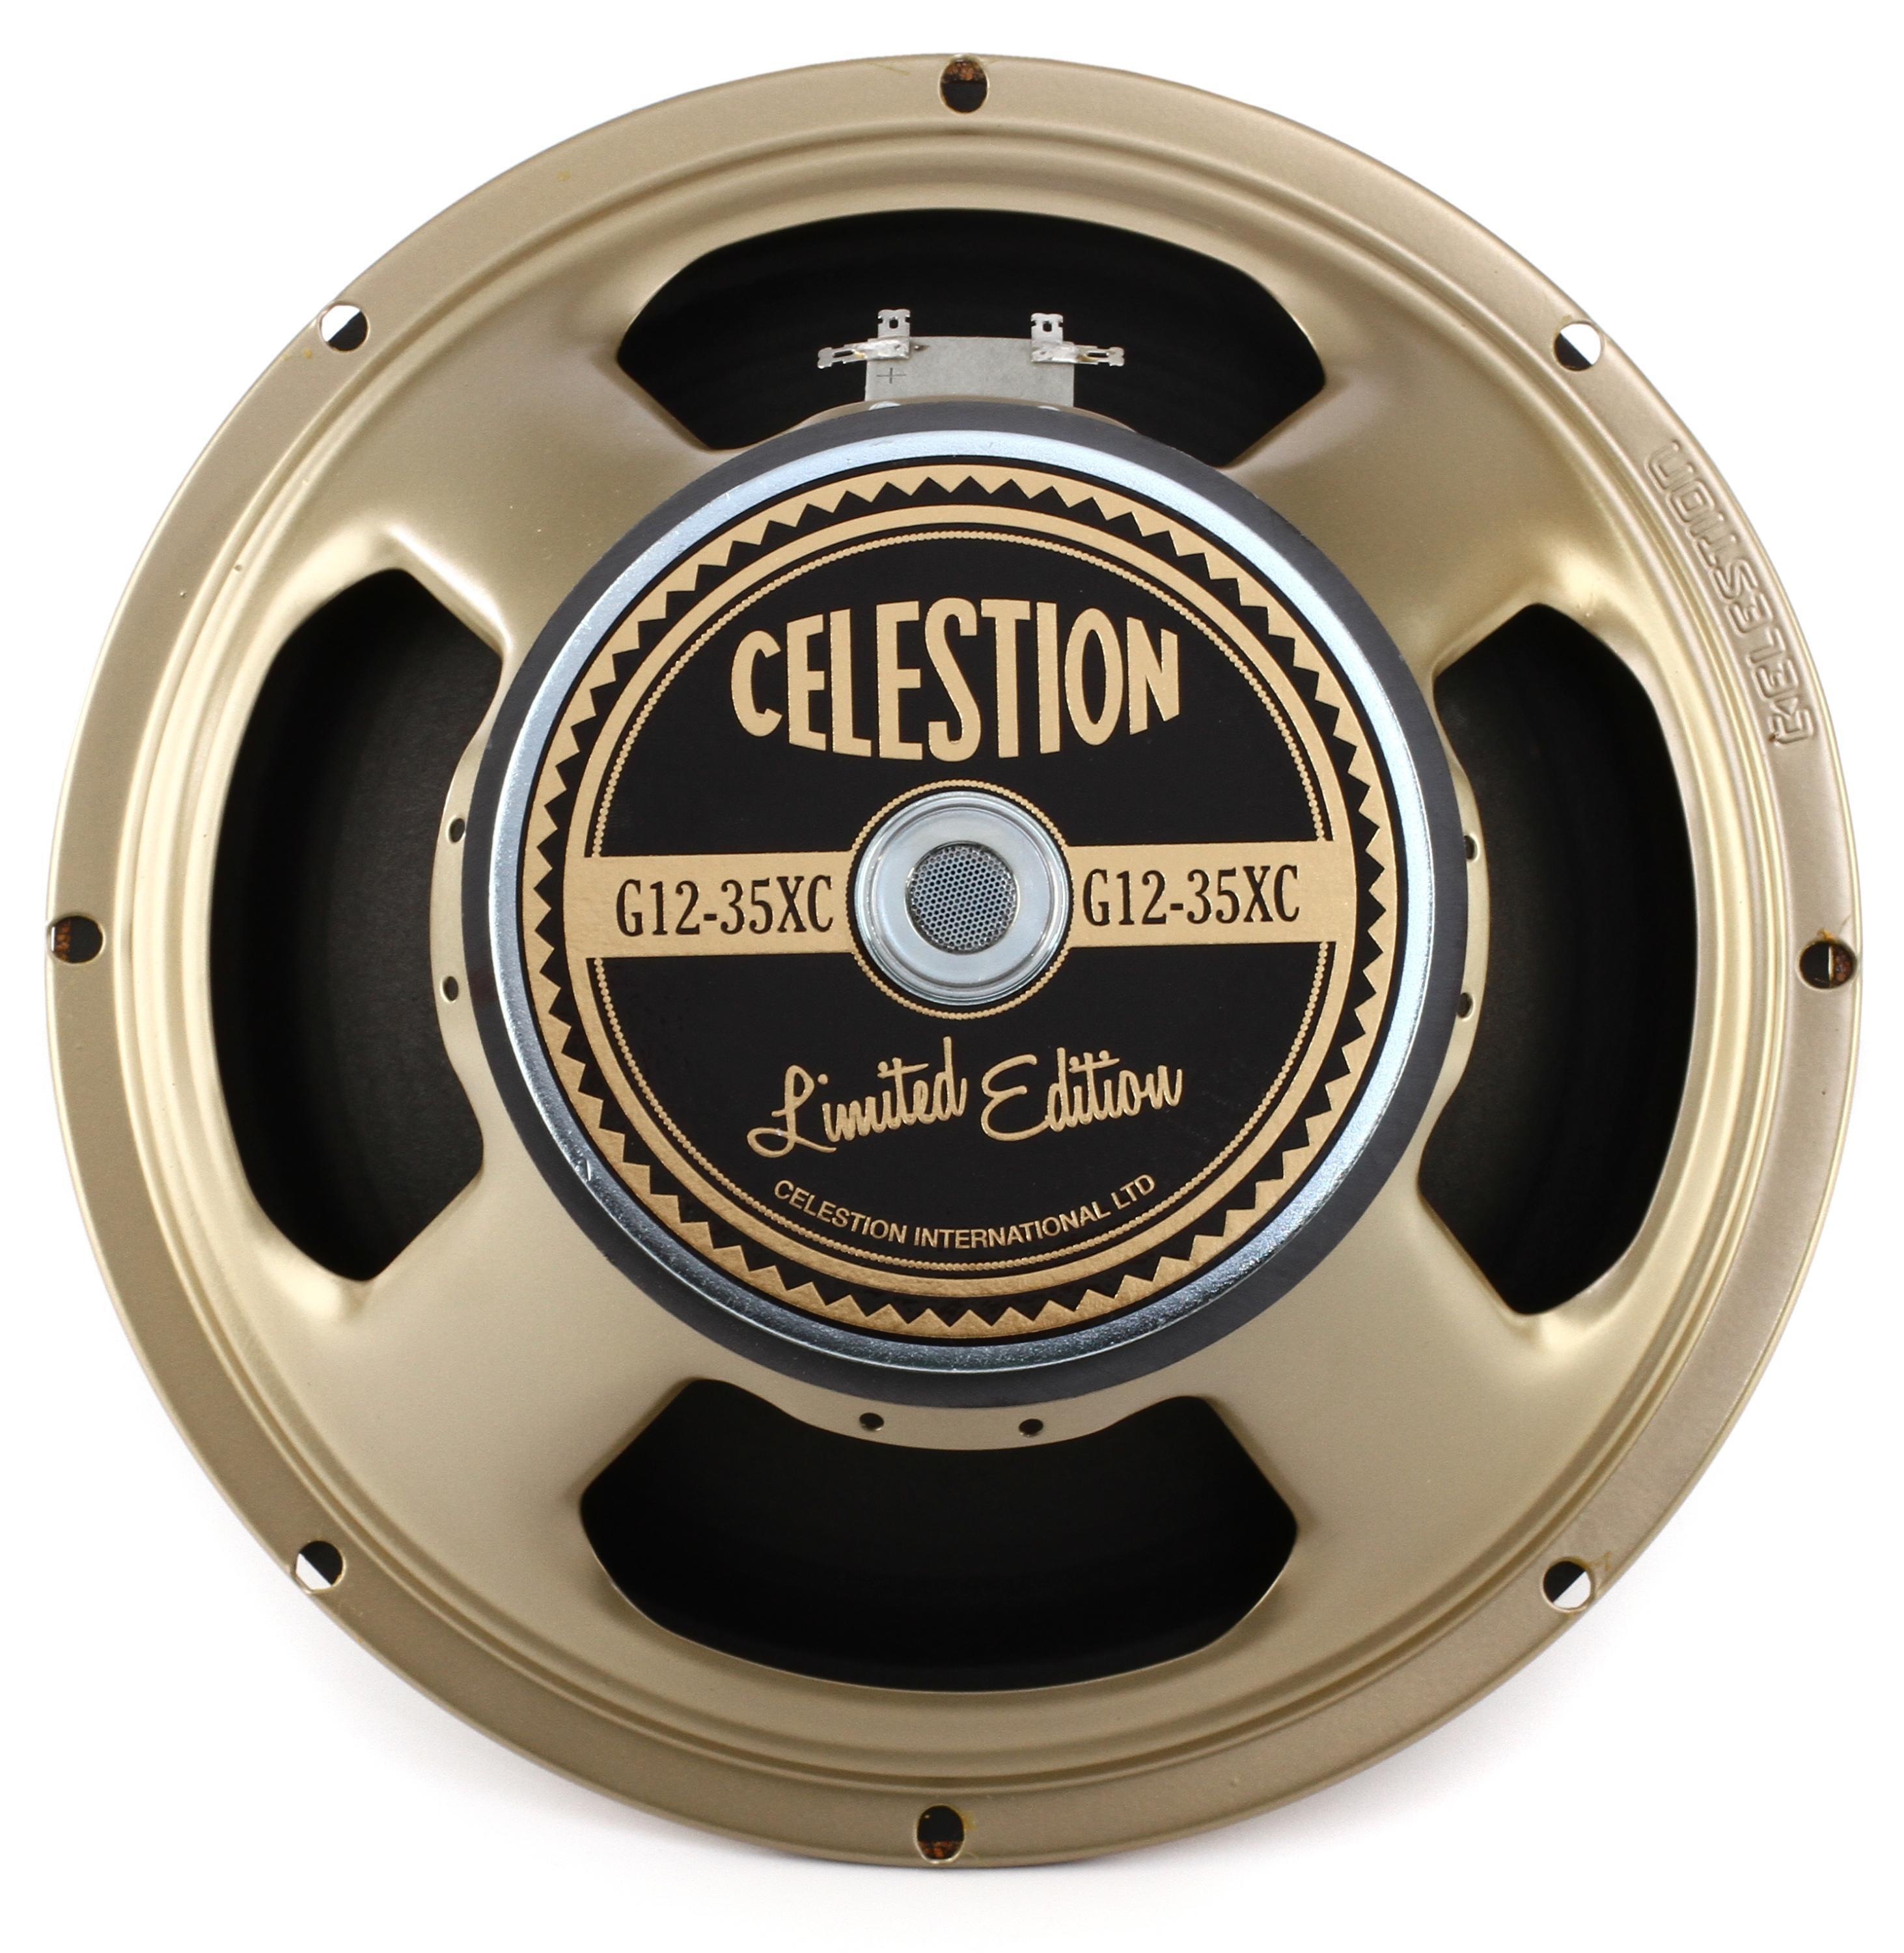 Celestion G12-35XC 90th Anniversary Limited Edition 12-inch 35-watt Guitar  Amp Replacement Speaker - 8 ohm